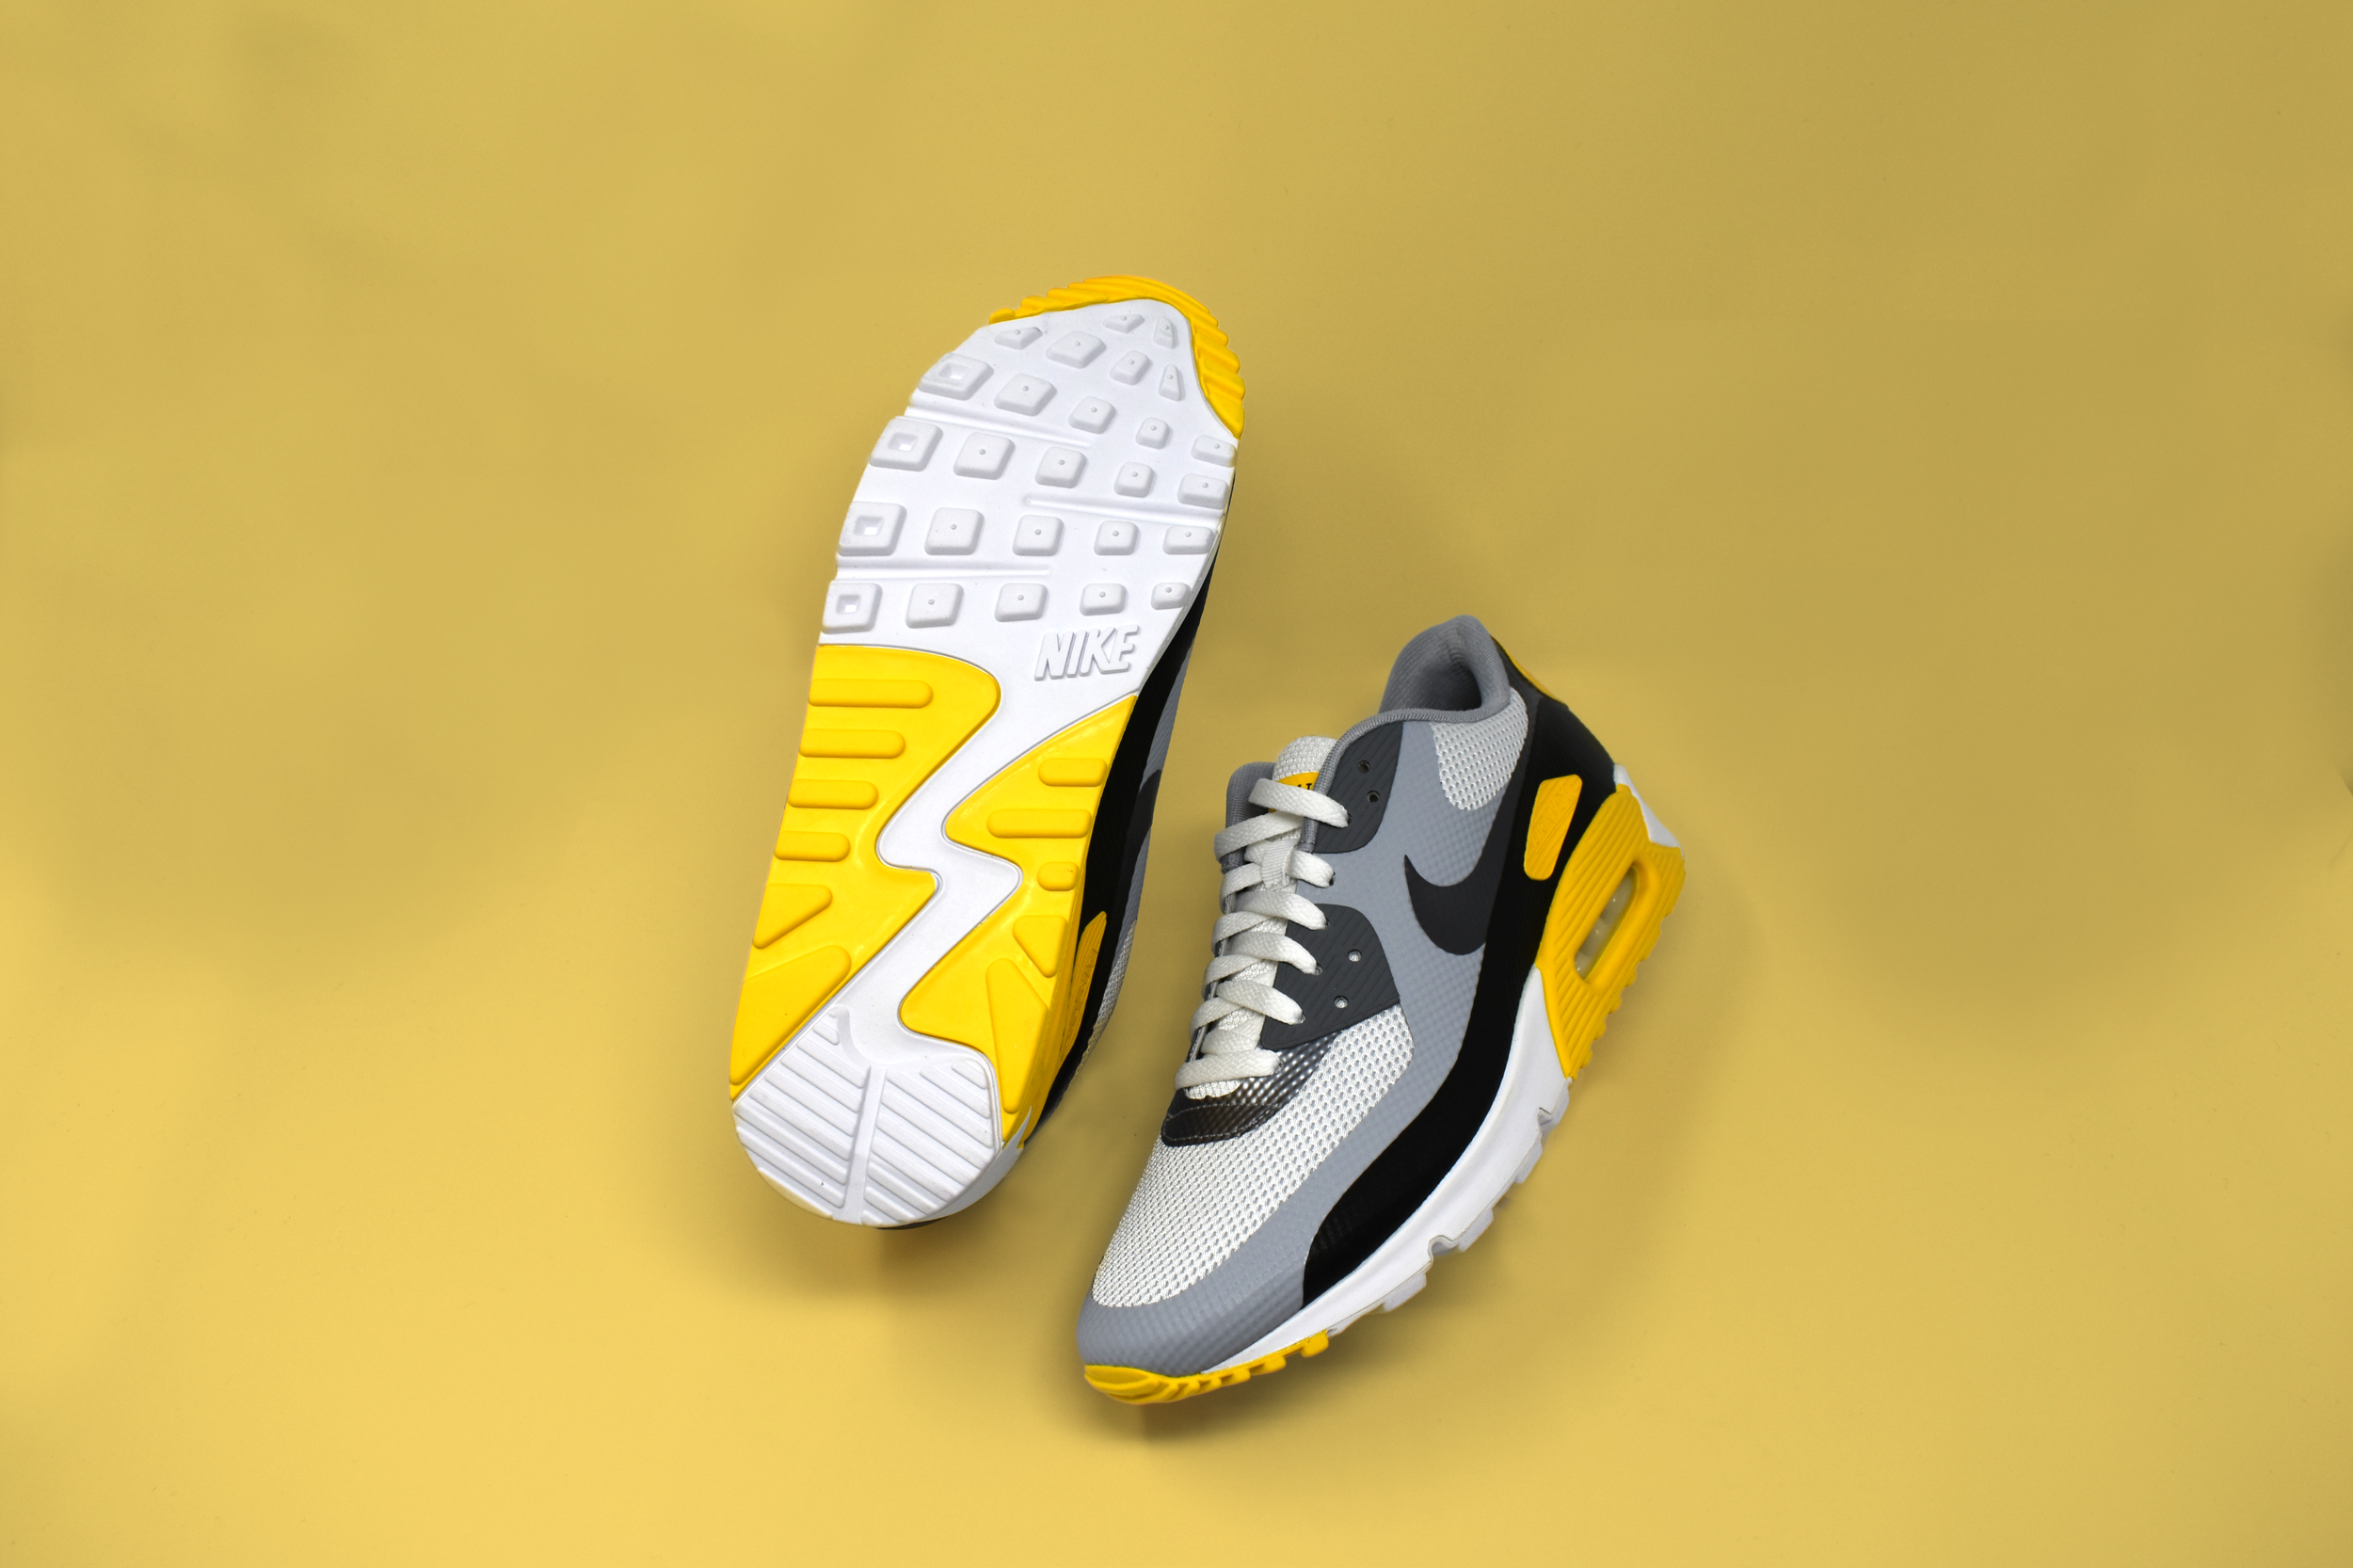 air max hyperfuse livestrong